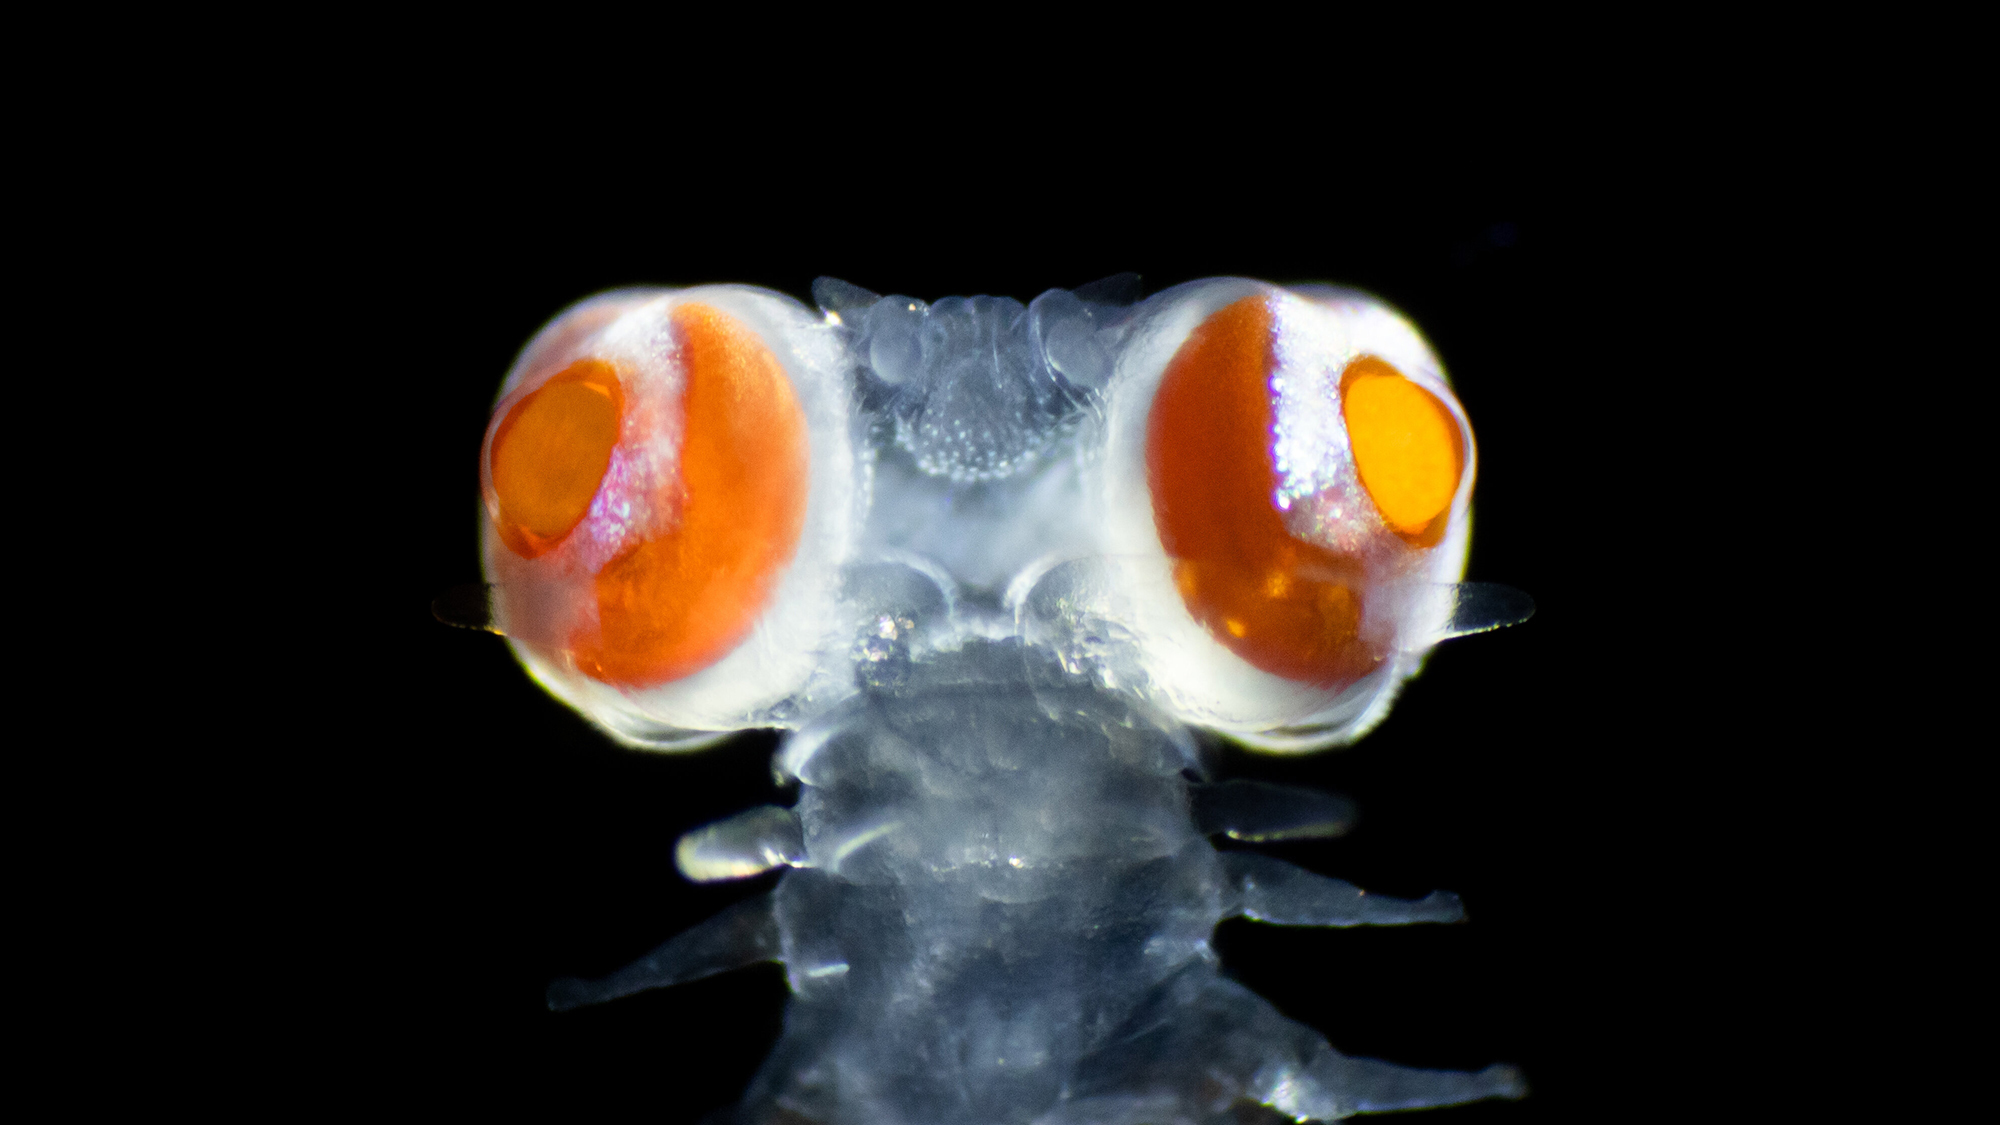 a transparent marine worm with two large reddish-orange eyes on the top of its head